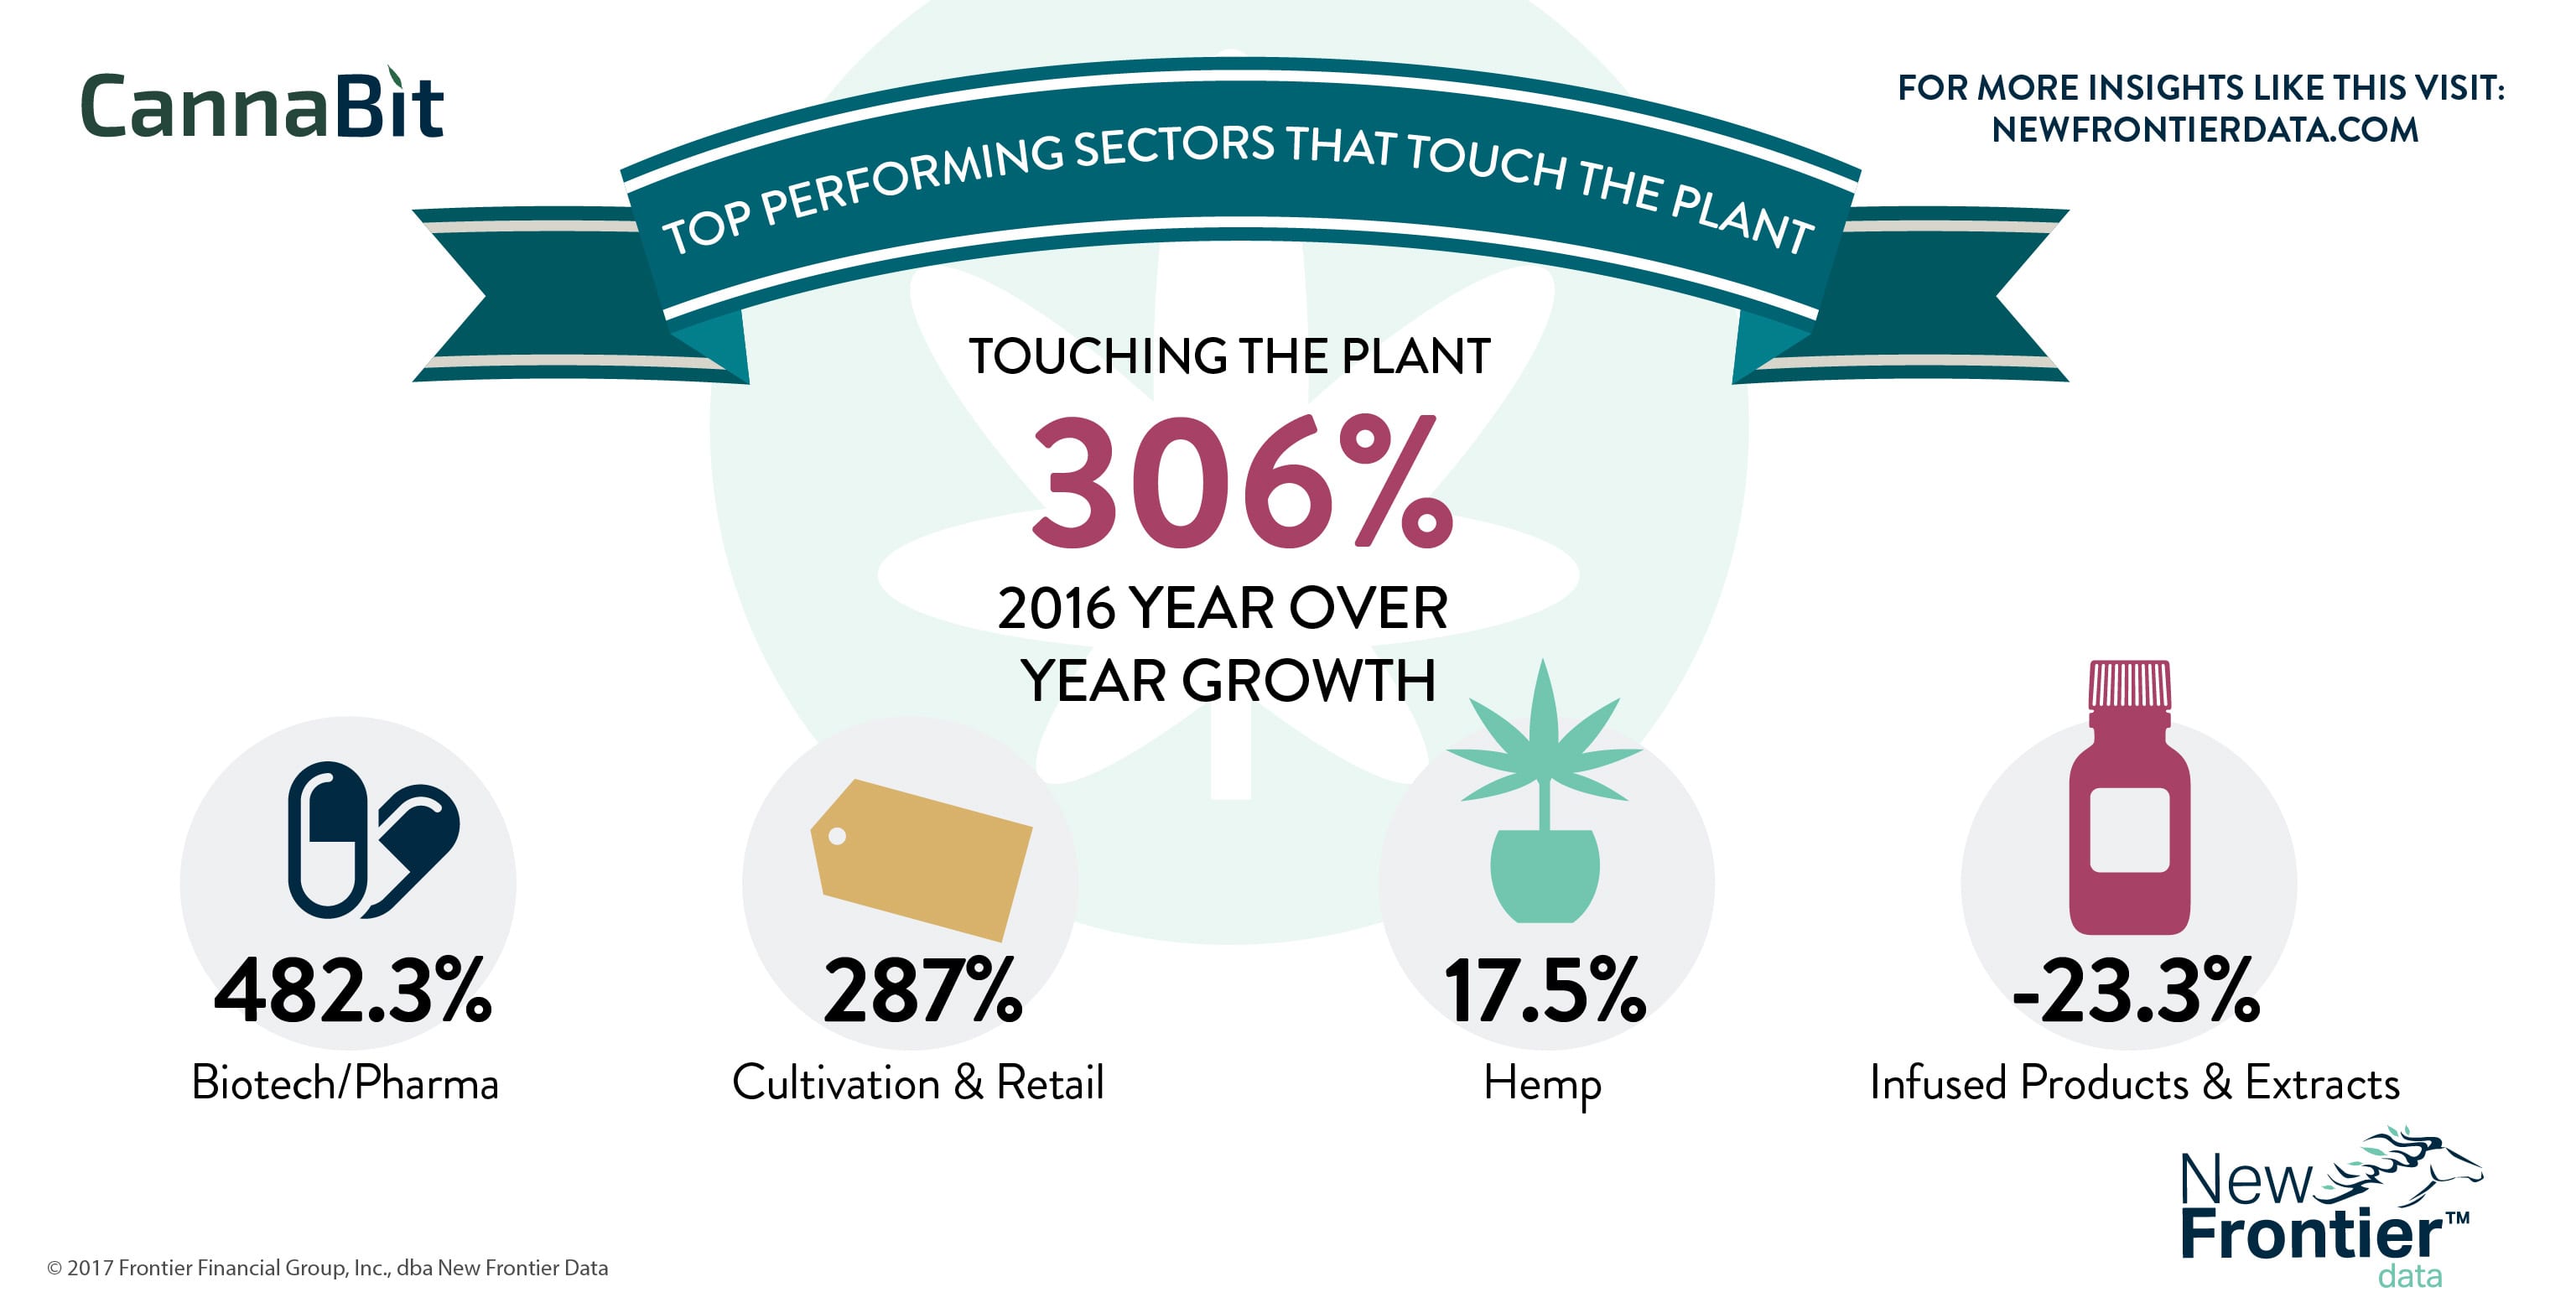 Cannabit: Top Performing Sectors that Touch the Plant/ 06112017